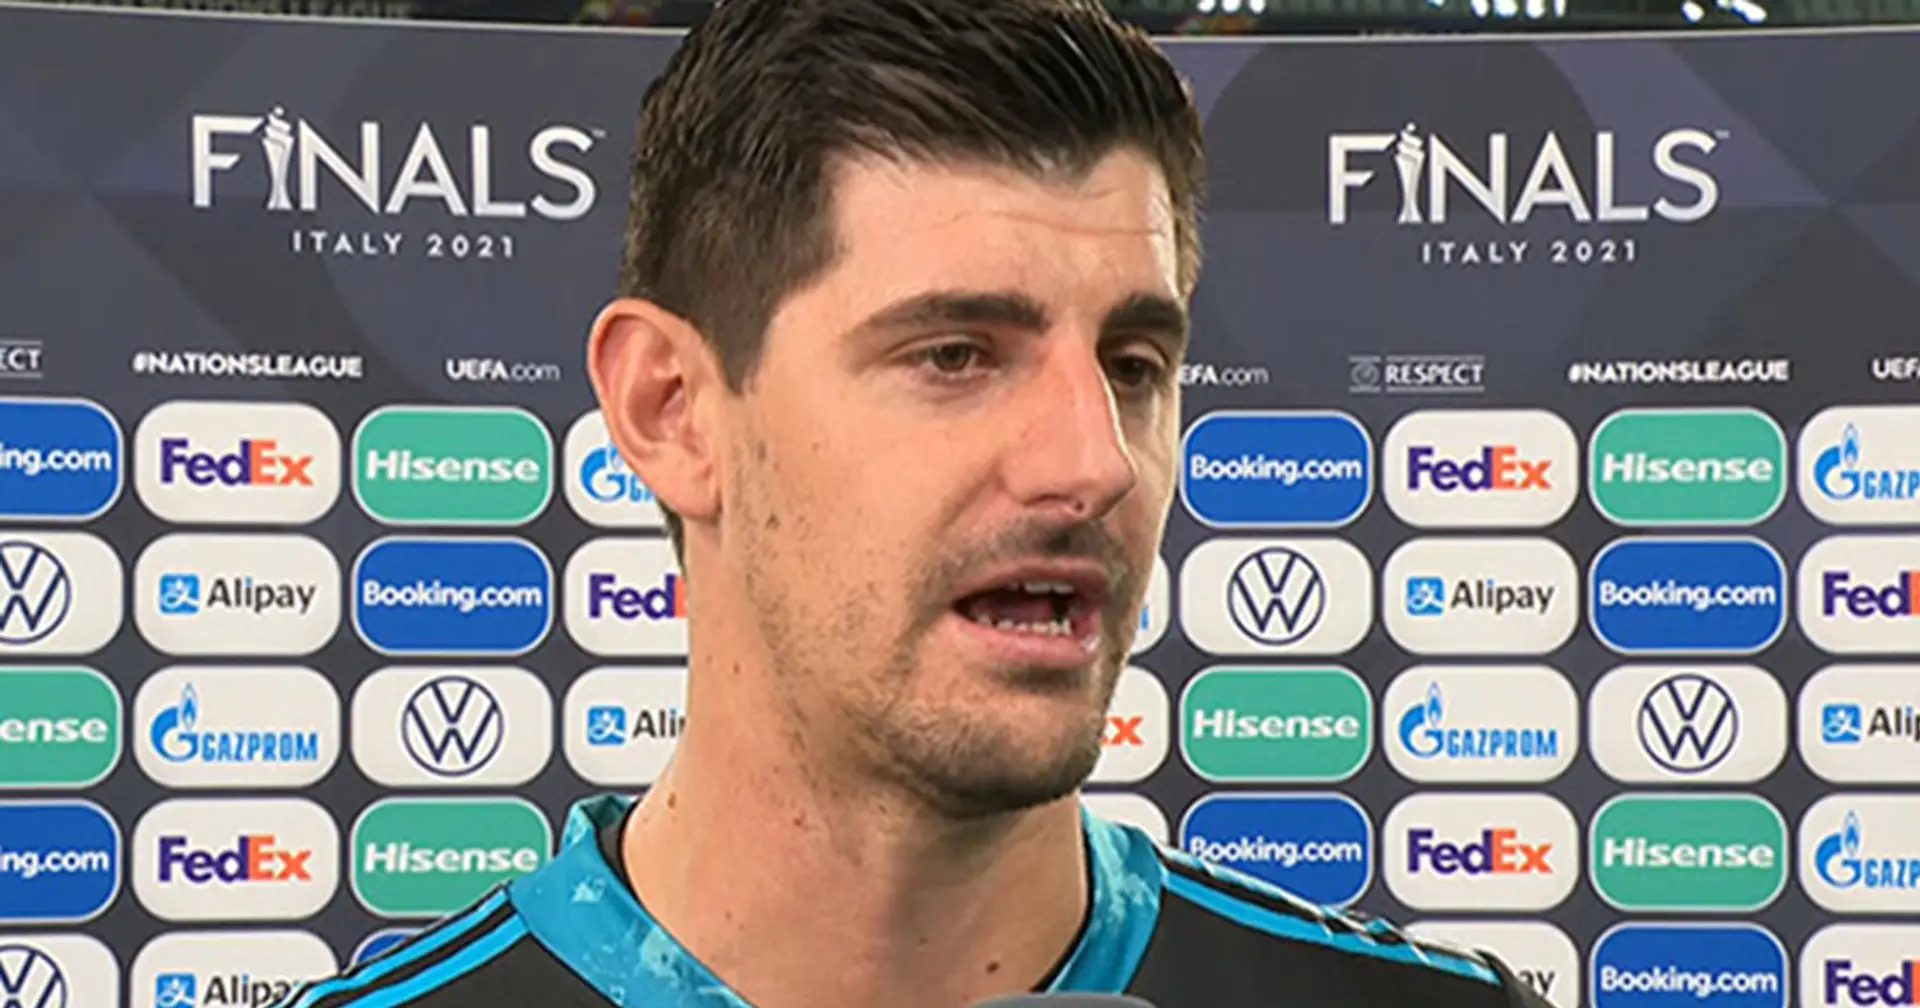 'Pointless. I don't know why we have to play that game': Courtois slams UEFA for Nations League format